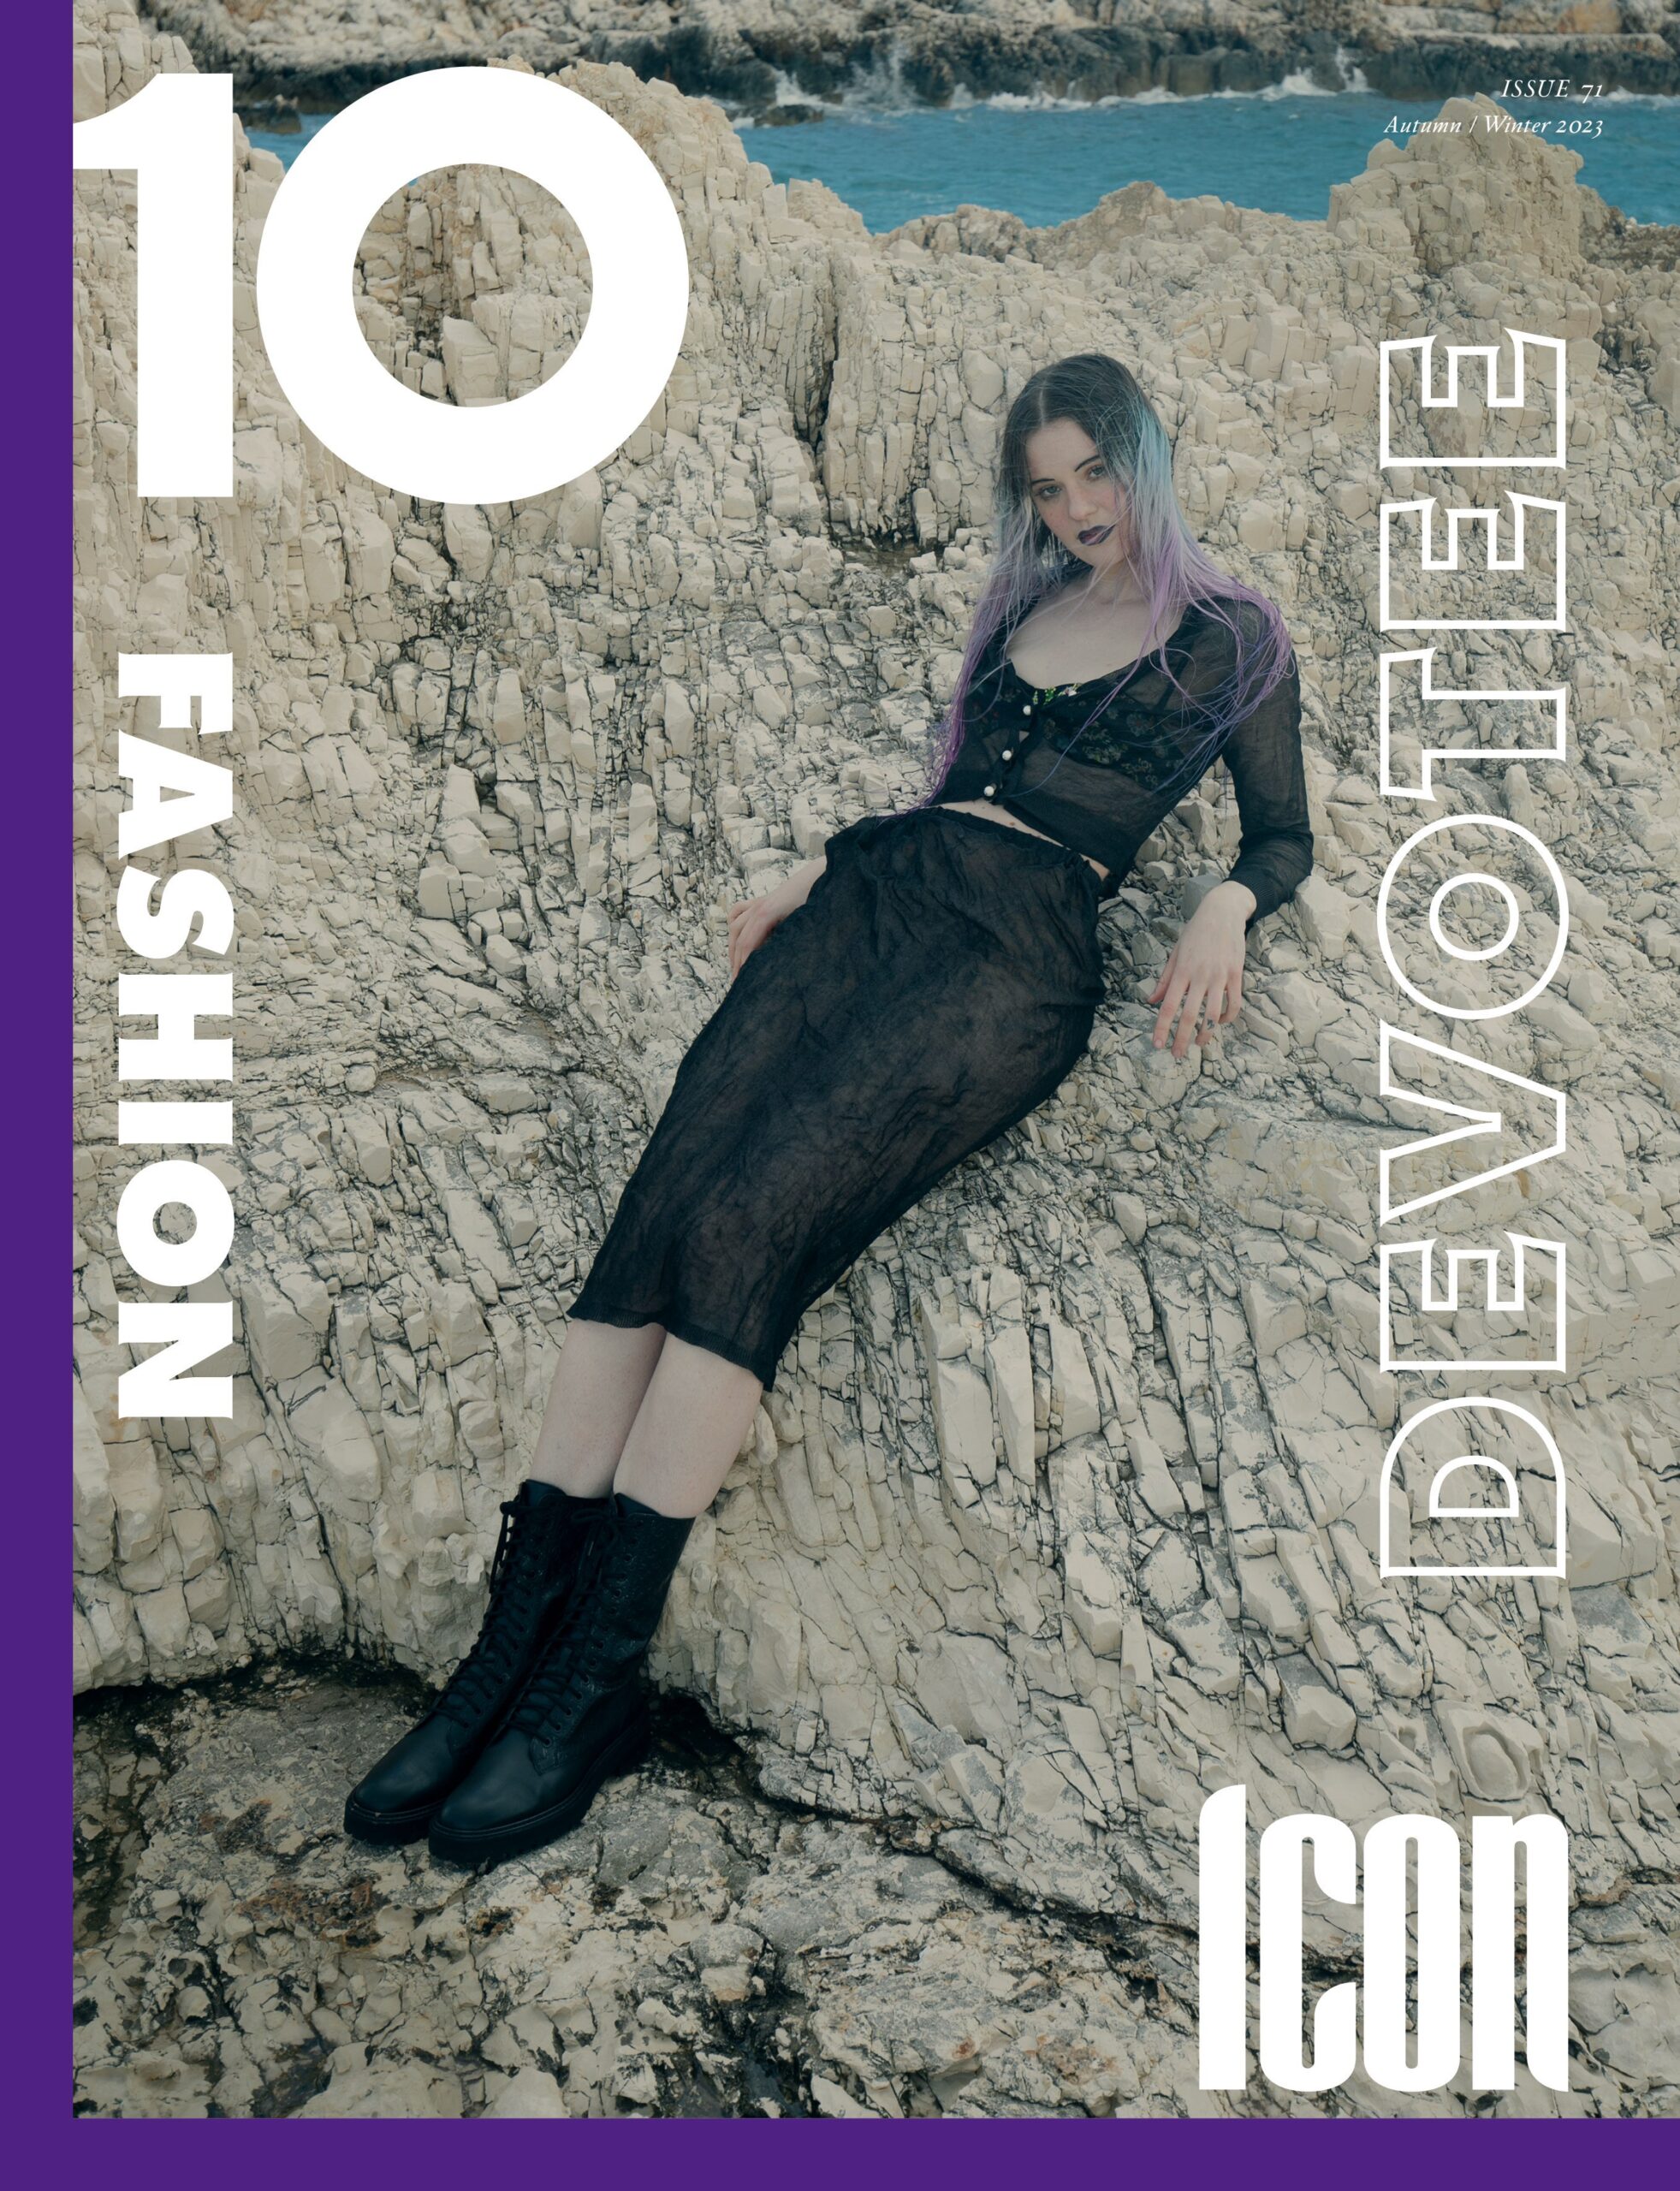 Tapestry-soho-frith-street-production-house-agency-london-10-magazine-tenmagazine-10curates-autumn-winter-issue-out-now-global-distribution-publications-publishing-reprographics-complete-services-campaigns-getintouch